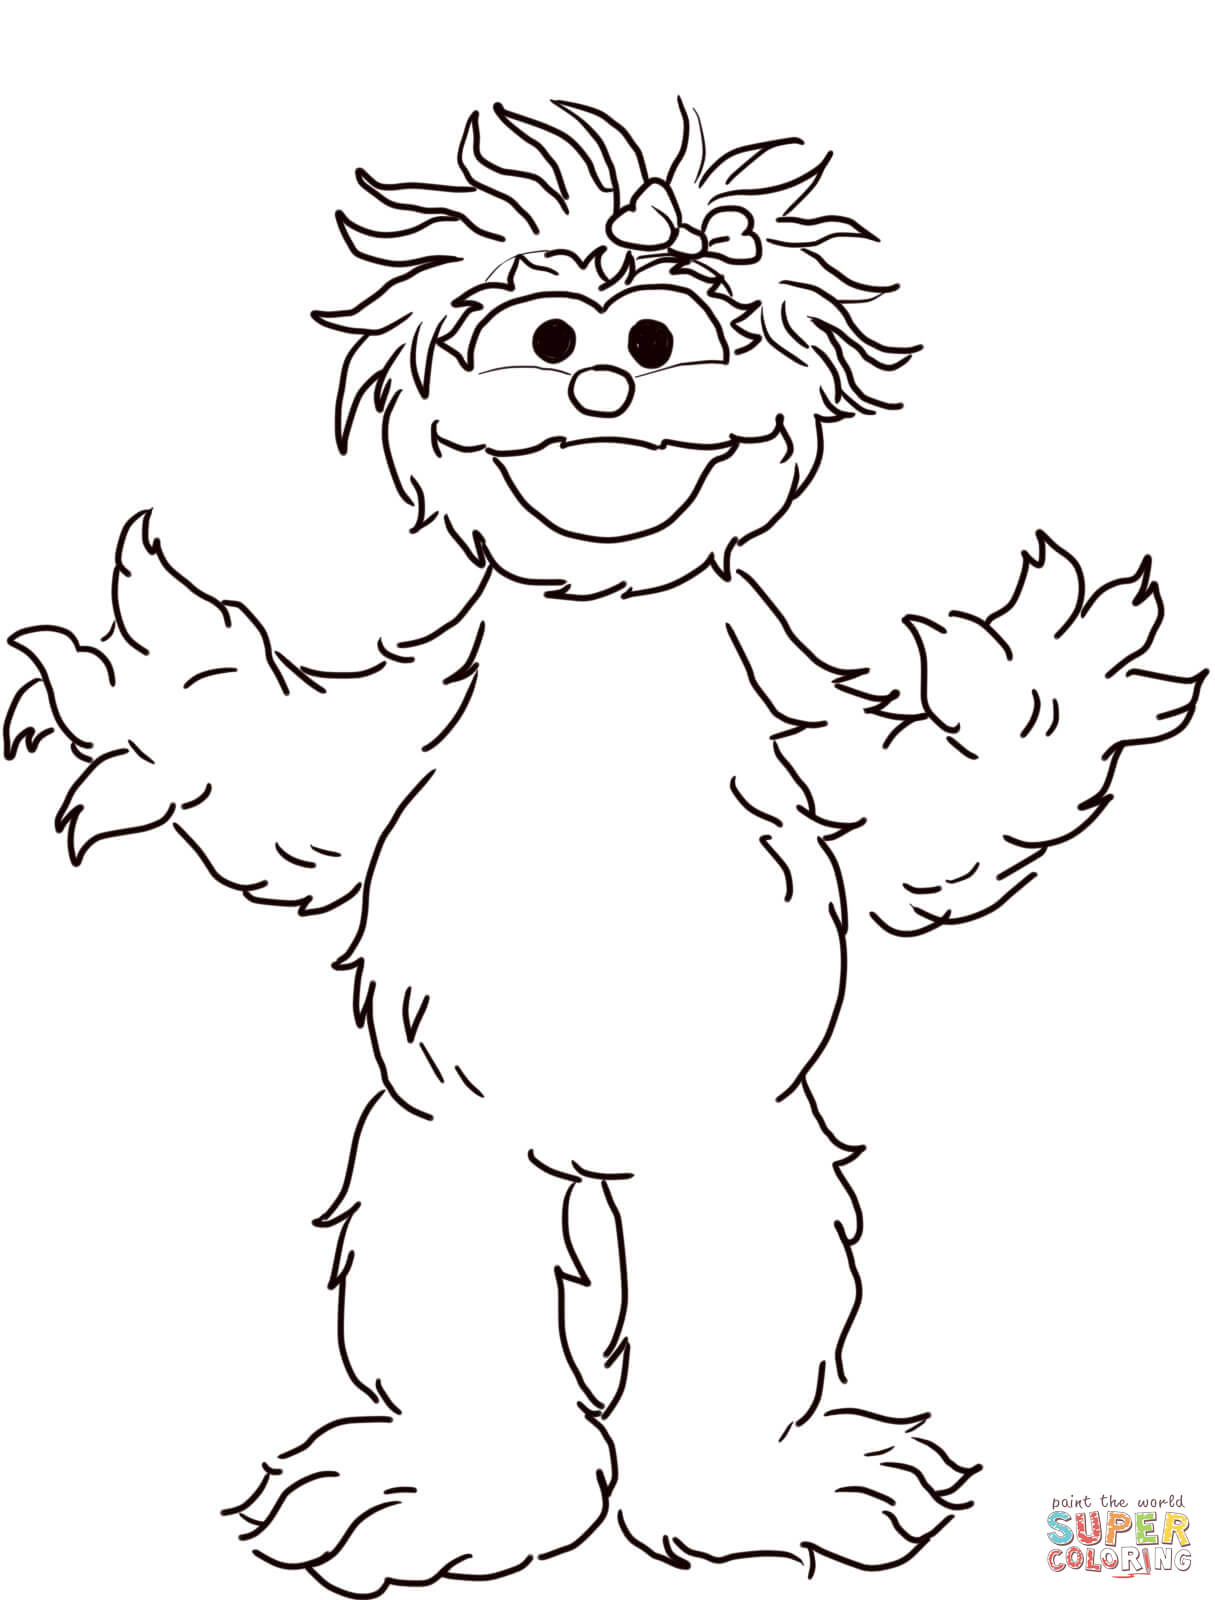 Sesame Street Rosita Coloring Page | Free Printable Coloring Pages - Free Printable Sesame Street Coloring Pages